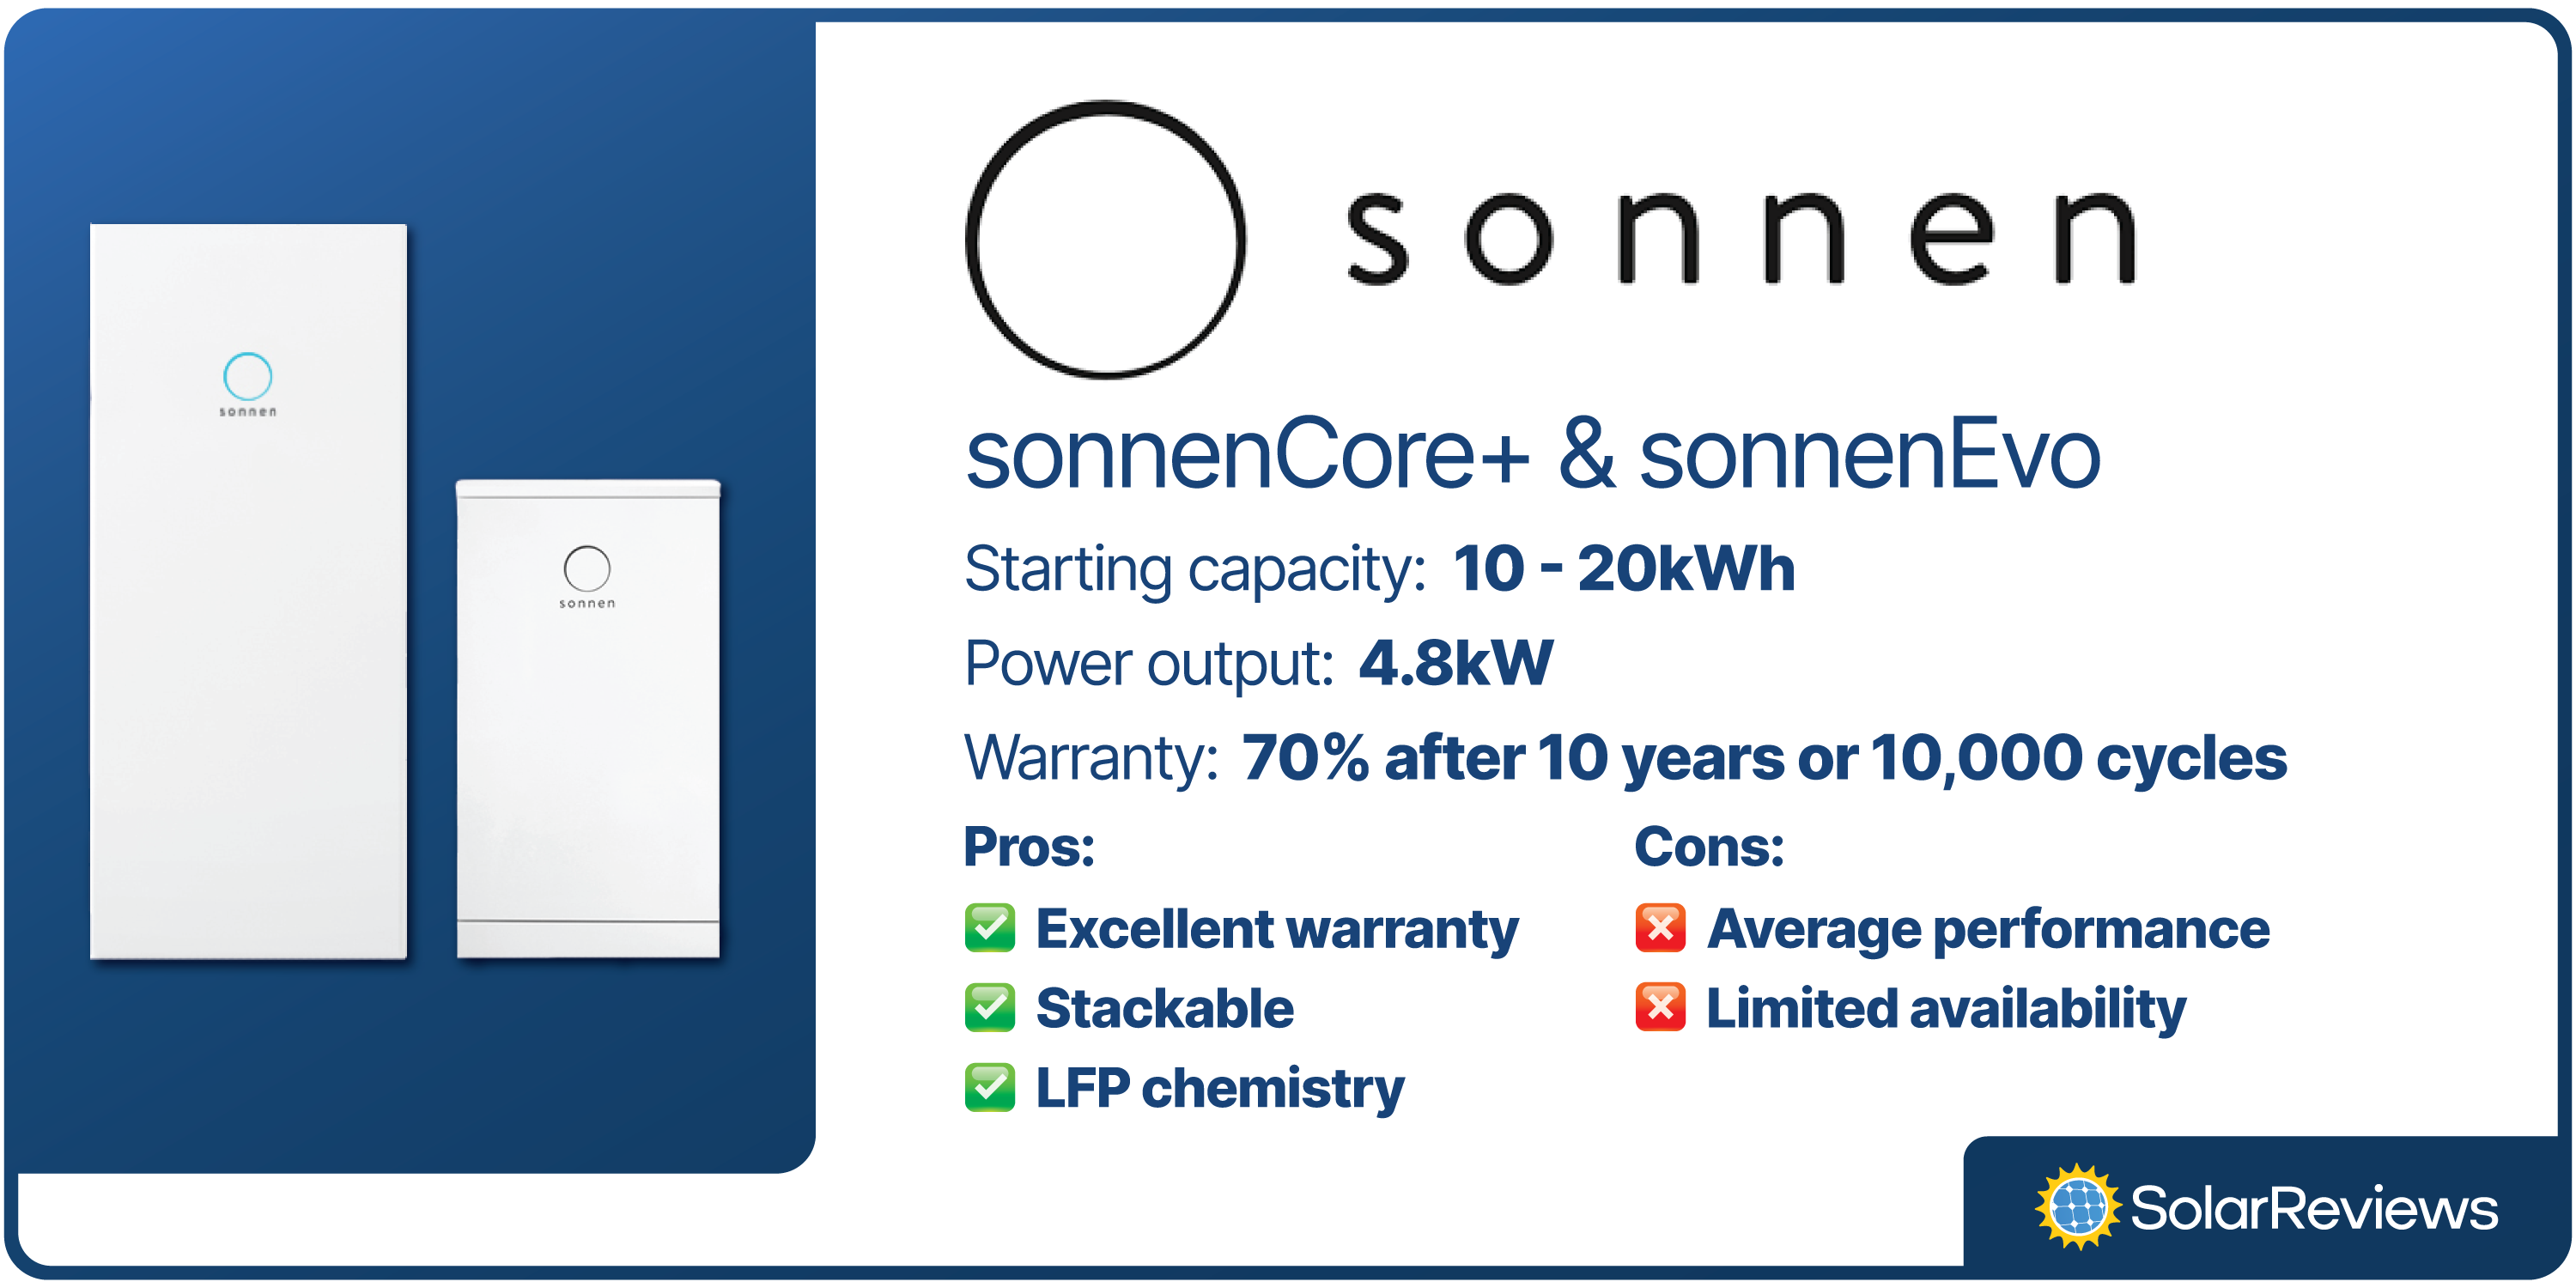 sonnen batteries have a starting capacity of 10 - 20 kWh, a 4.8 kW power output, an are AC coupled. sonnen has excellent warranties, are stackable, can participate in VPPs, and use LFP chemistry. But, they are average performers, aren't as flexible in size, and have limited availability in the U.S